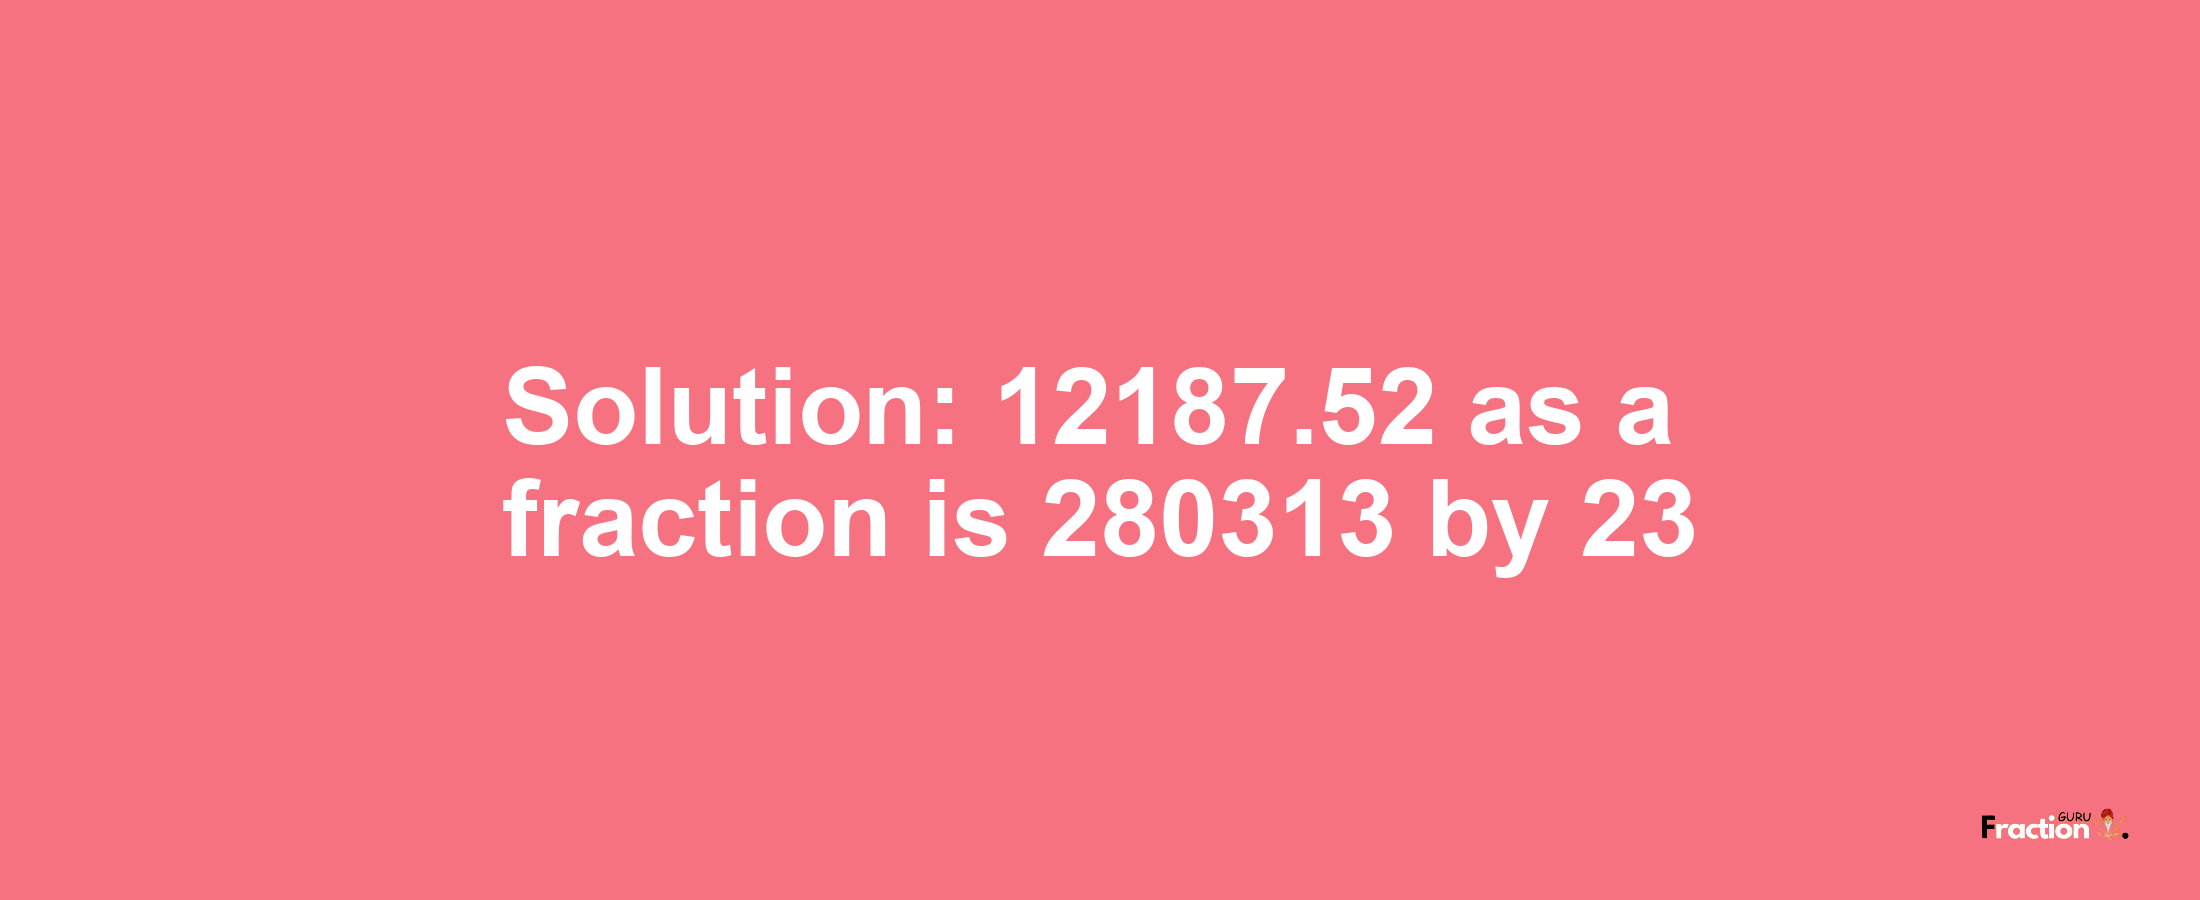 Solution:12187.52 as a fraction is 280313/23